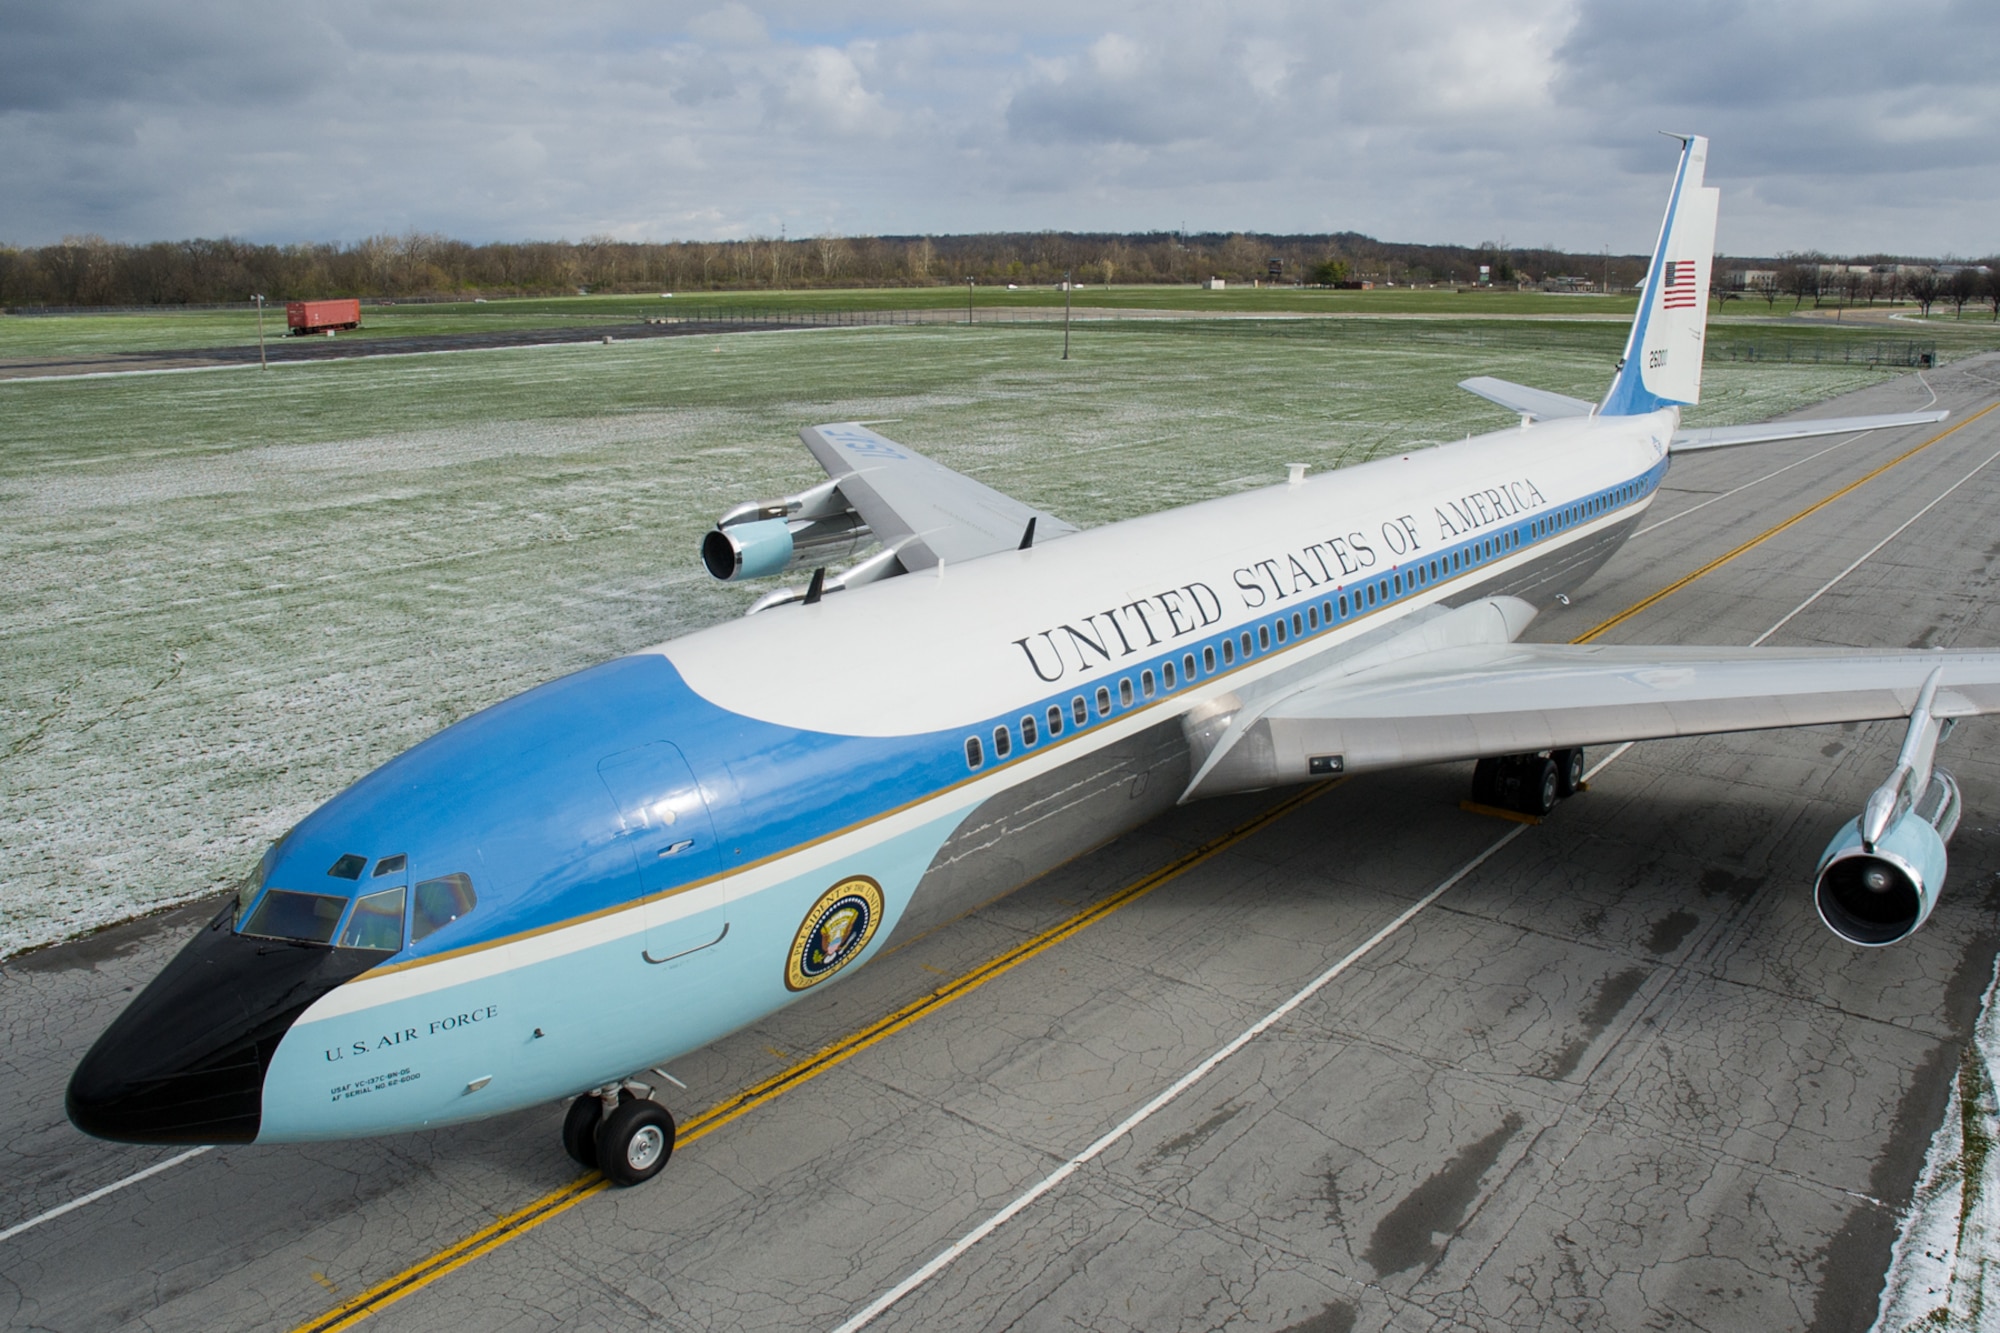 DAYTON, Ohio -- The VC-137C Air Force One (SAM 26000) at the National Museum of the United States Air Force on April 9, 2016. (U.S. Air Force photo by Ken LaRock)